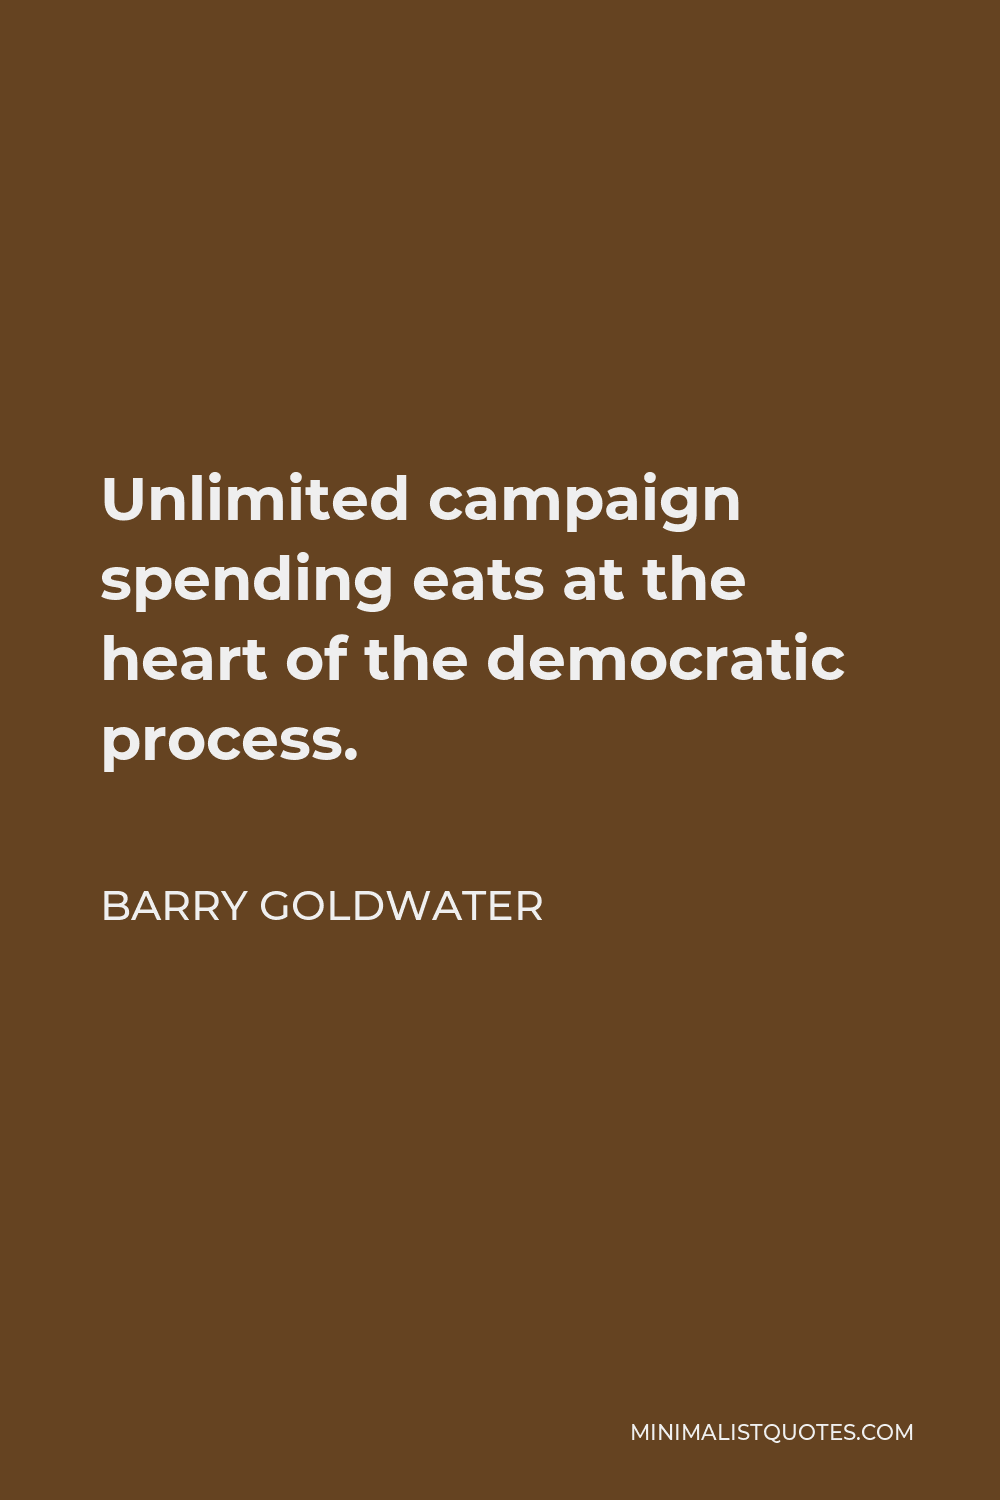 Barry Goldwater Quote - Unlimited campaign spending eats at the heart of the democratic process.